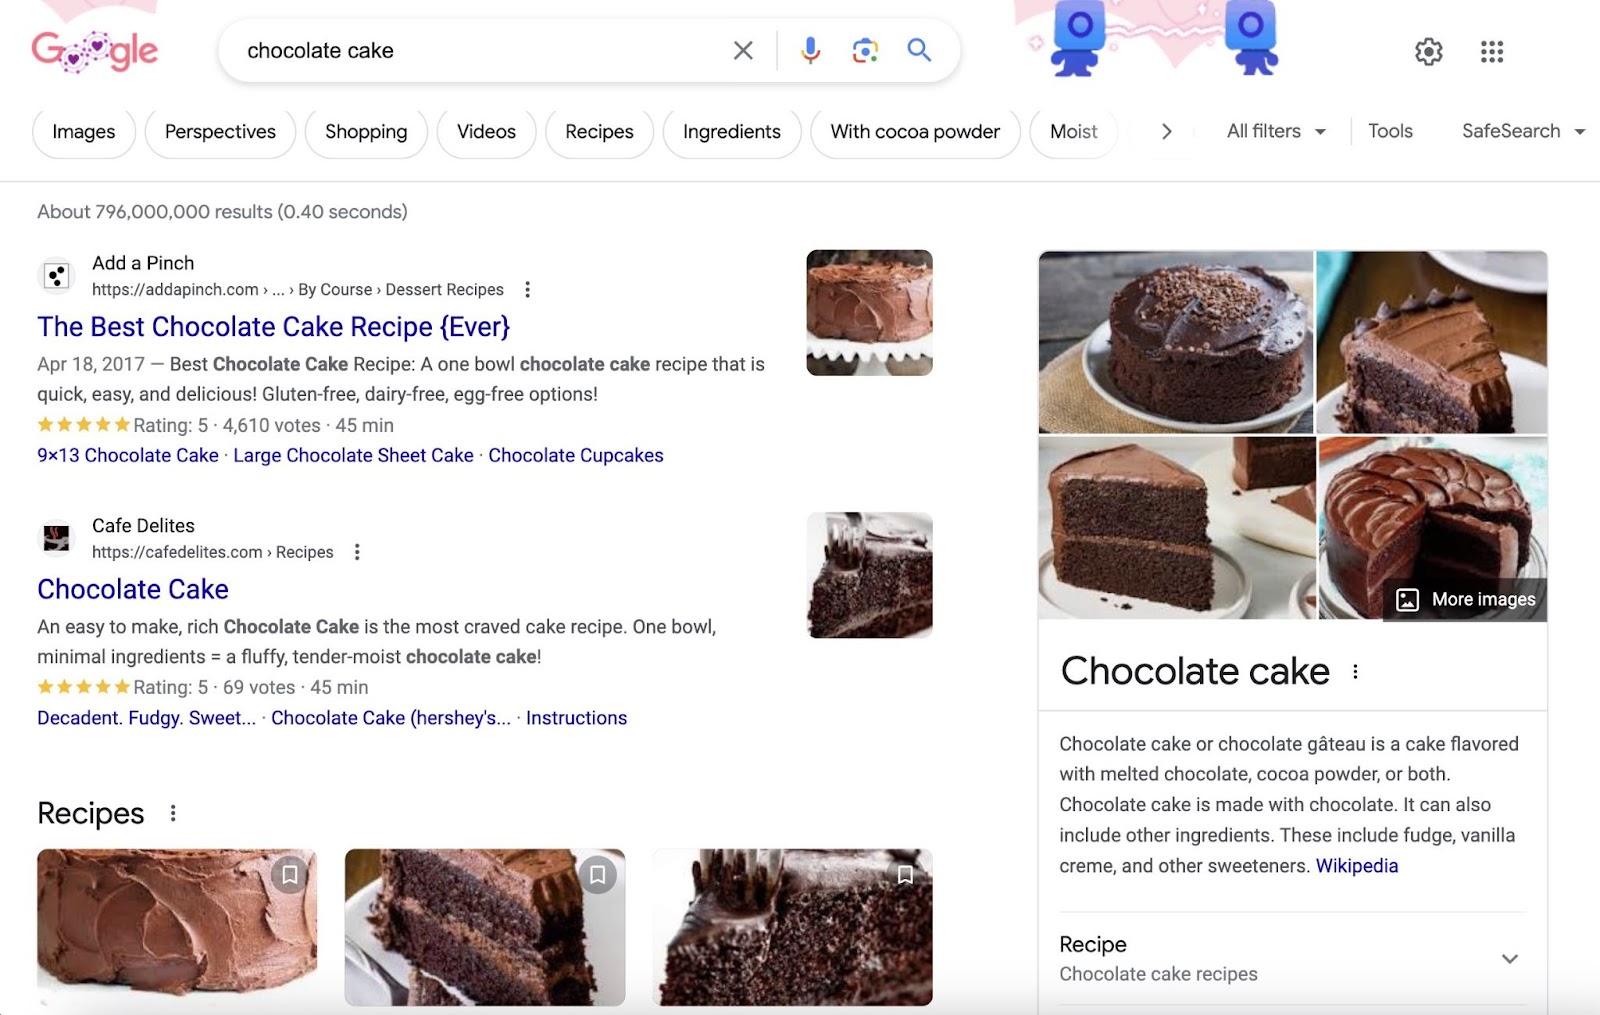 A section of Google's SERP for “chocolate cake” query